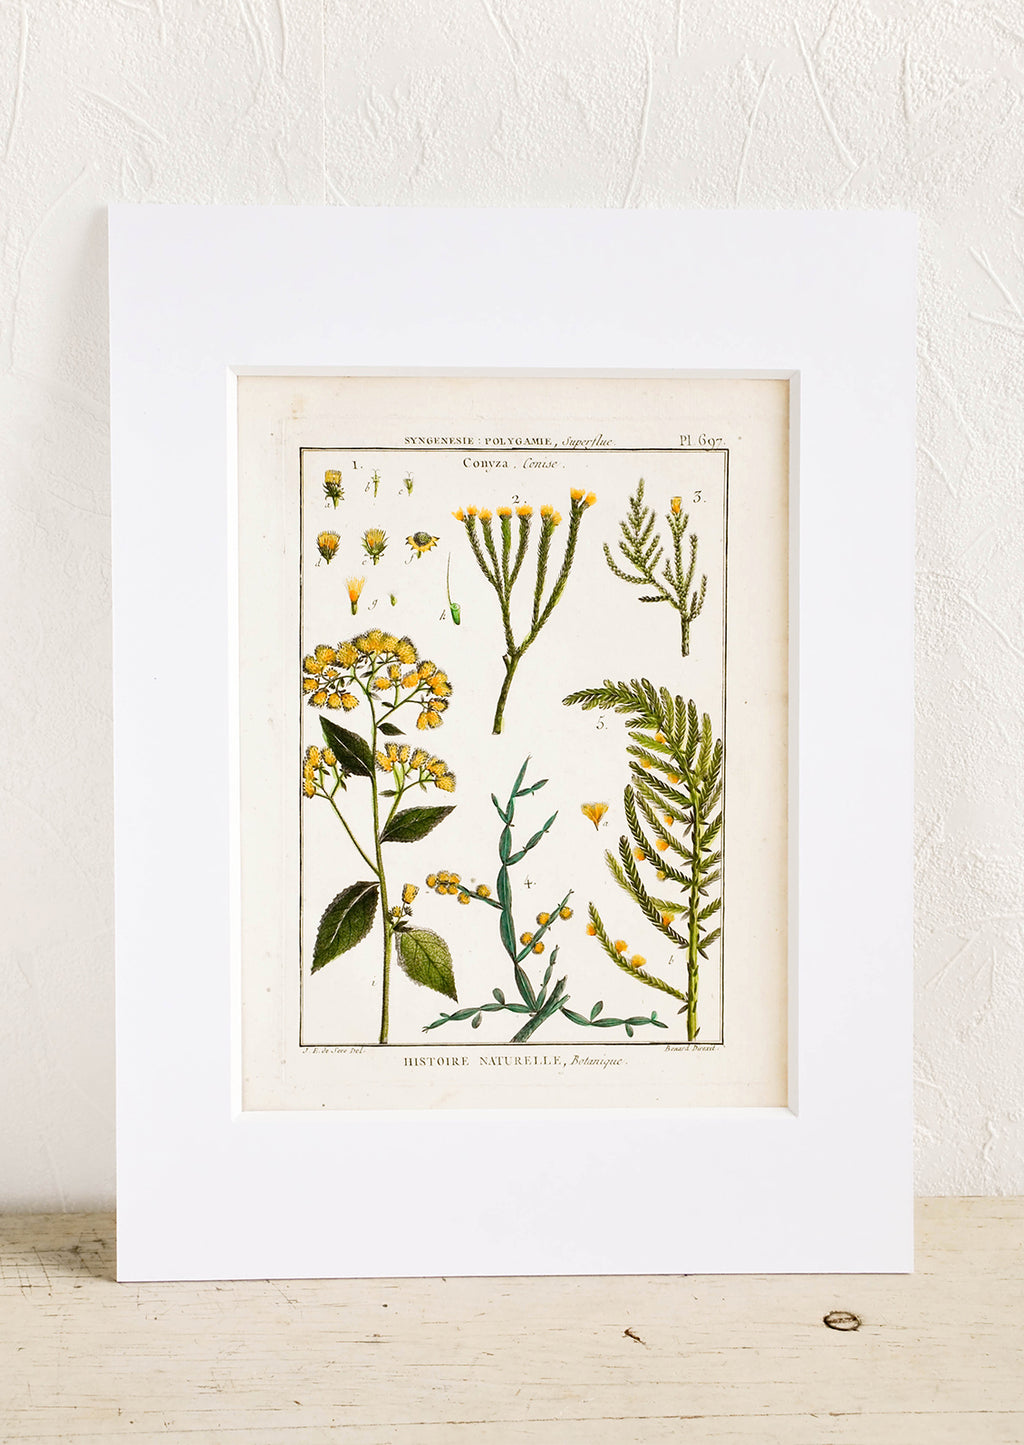 2: Vintage botanical print with white mat. Print features green and yellow leaves and flowers.